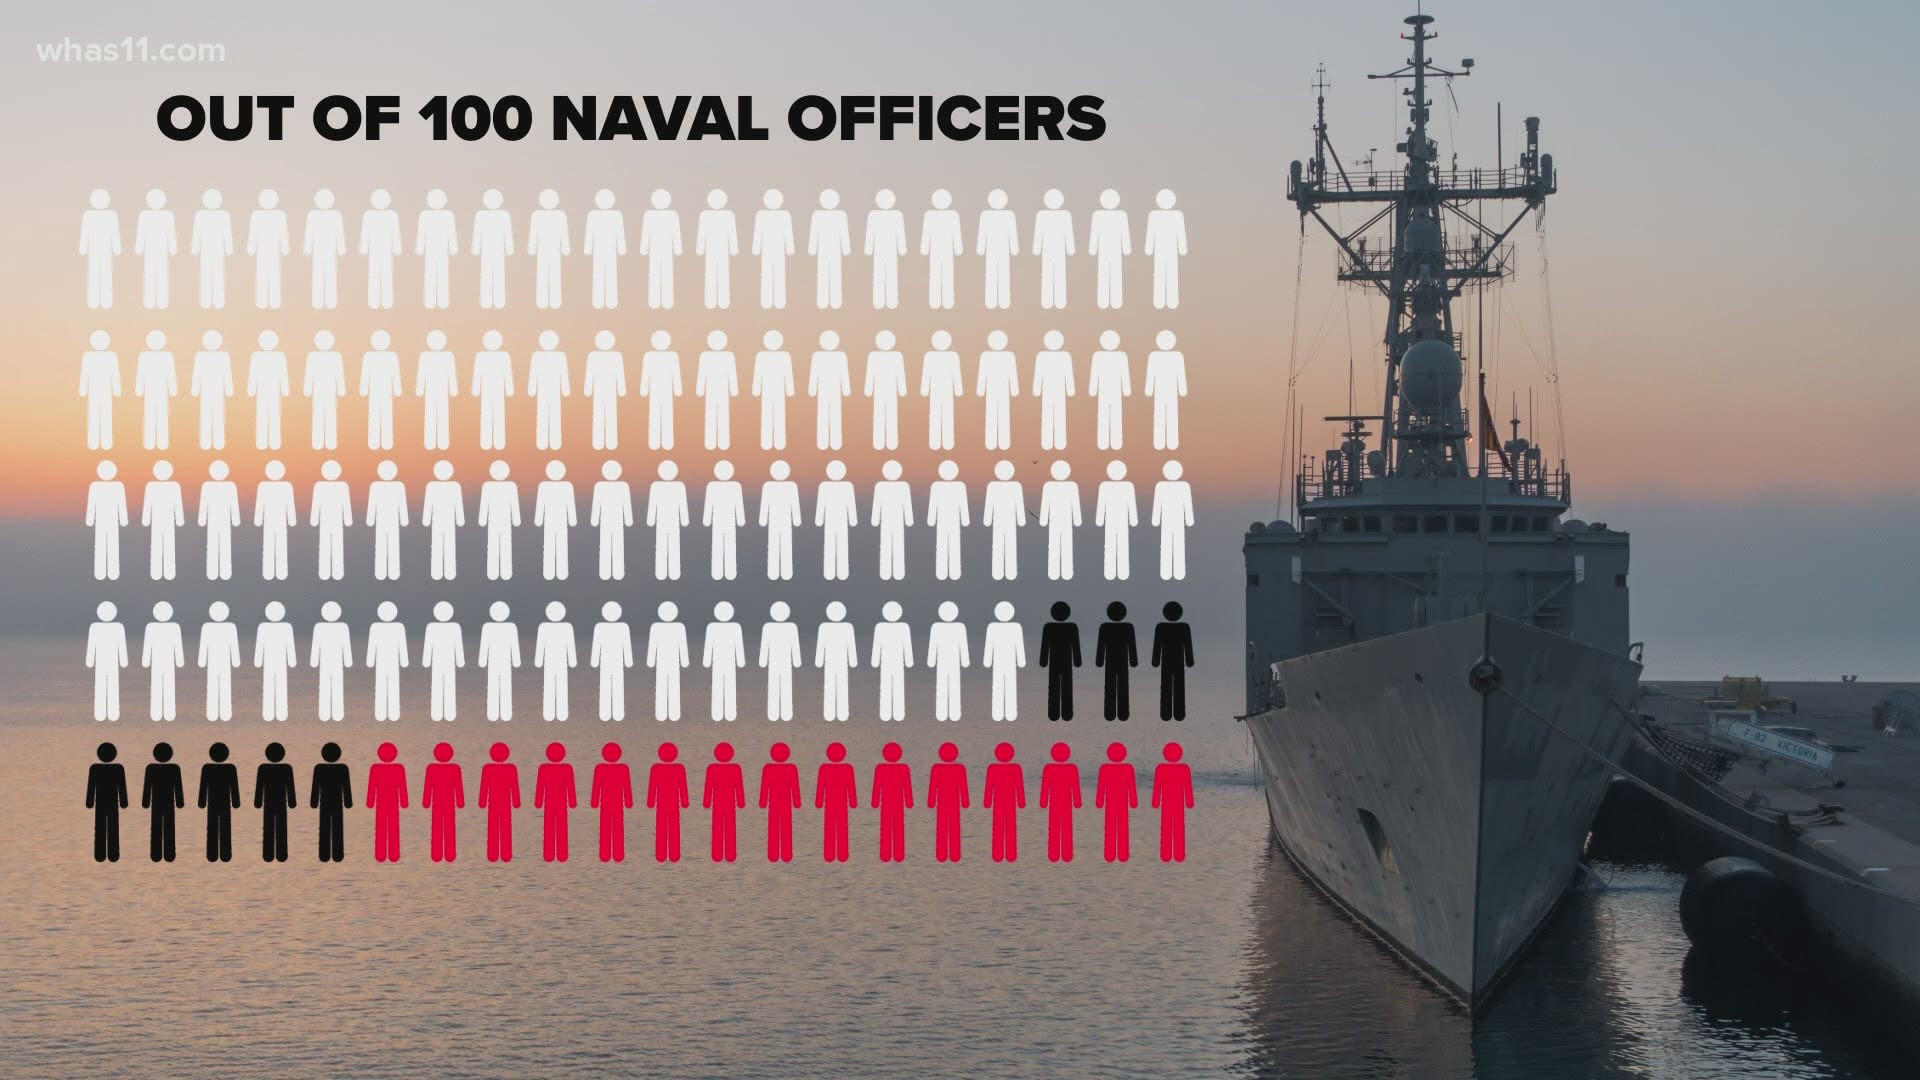 Six months of work on Task Force One Navy was an eye-opening experience for Chief of Naval Personnel John Nowell.